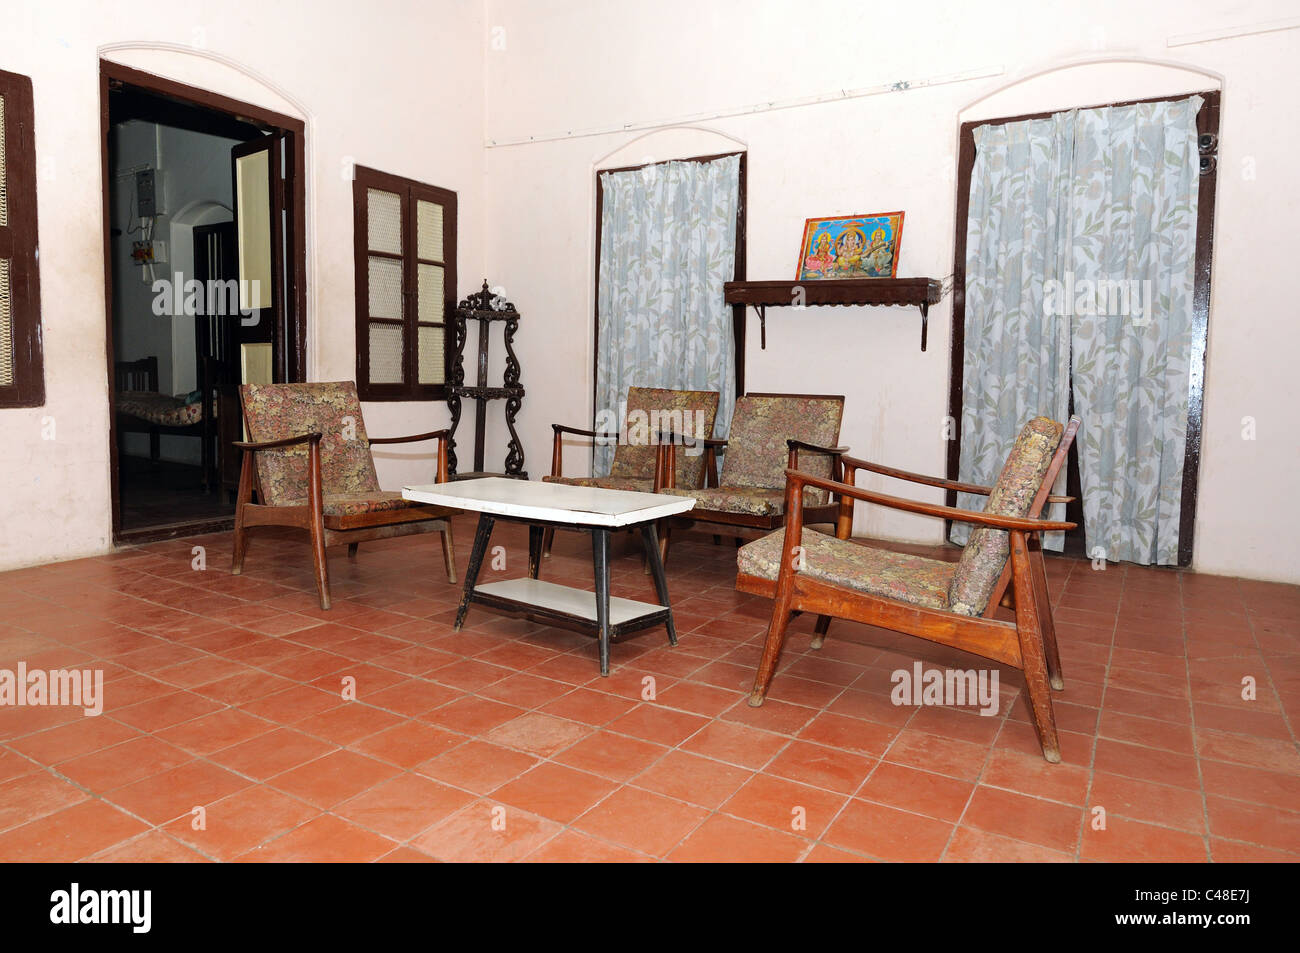 An old traditional indian house with furniture on display Stock ...